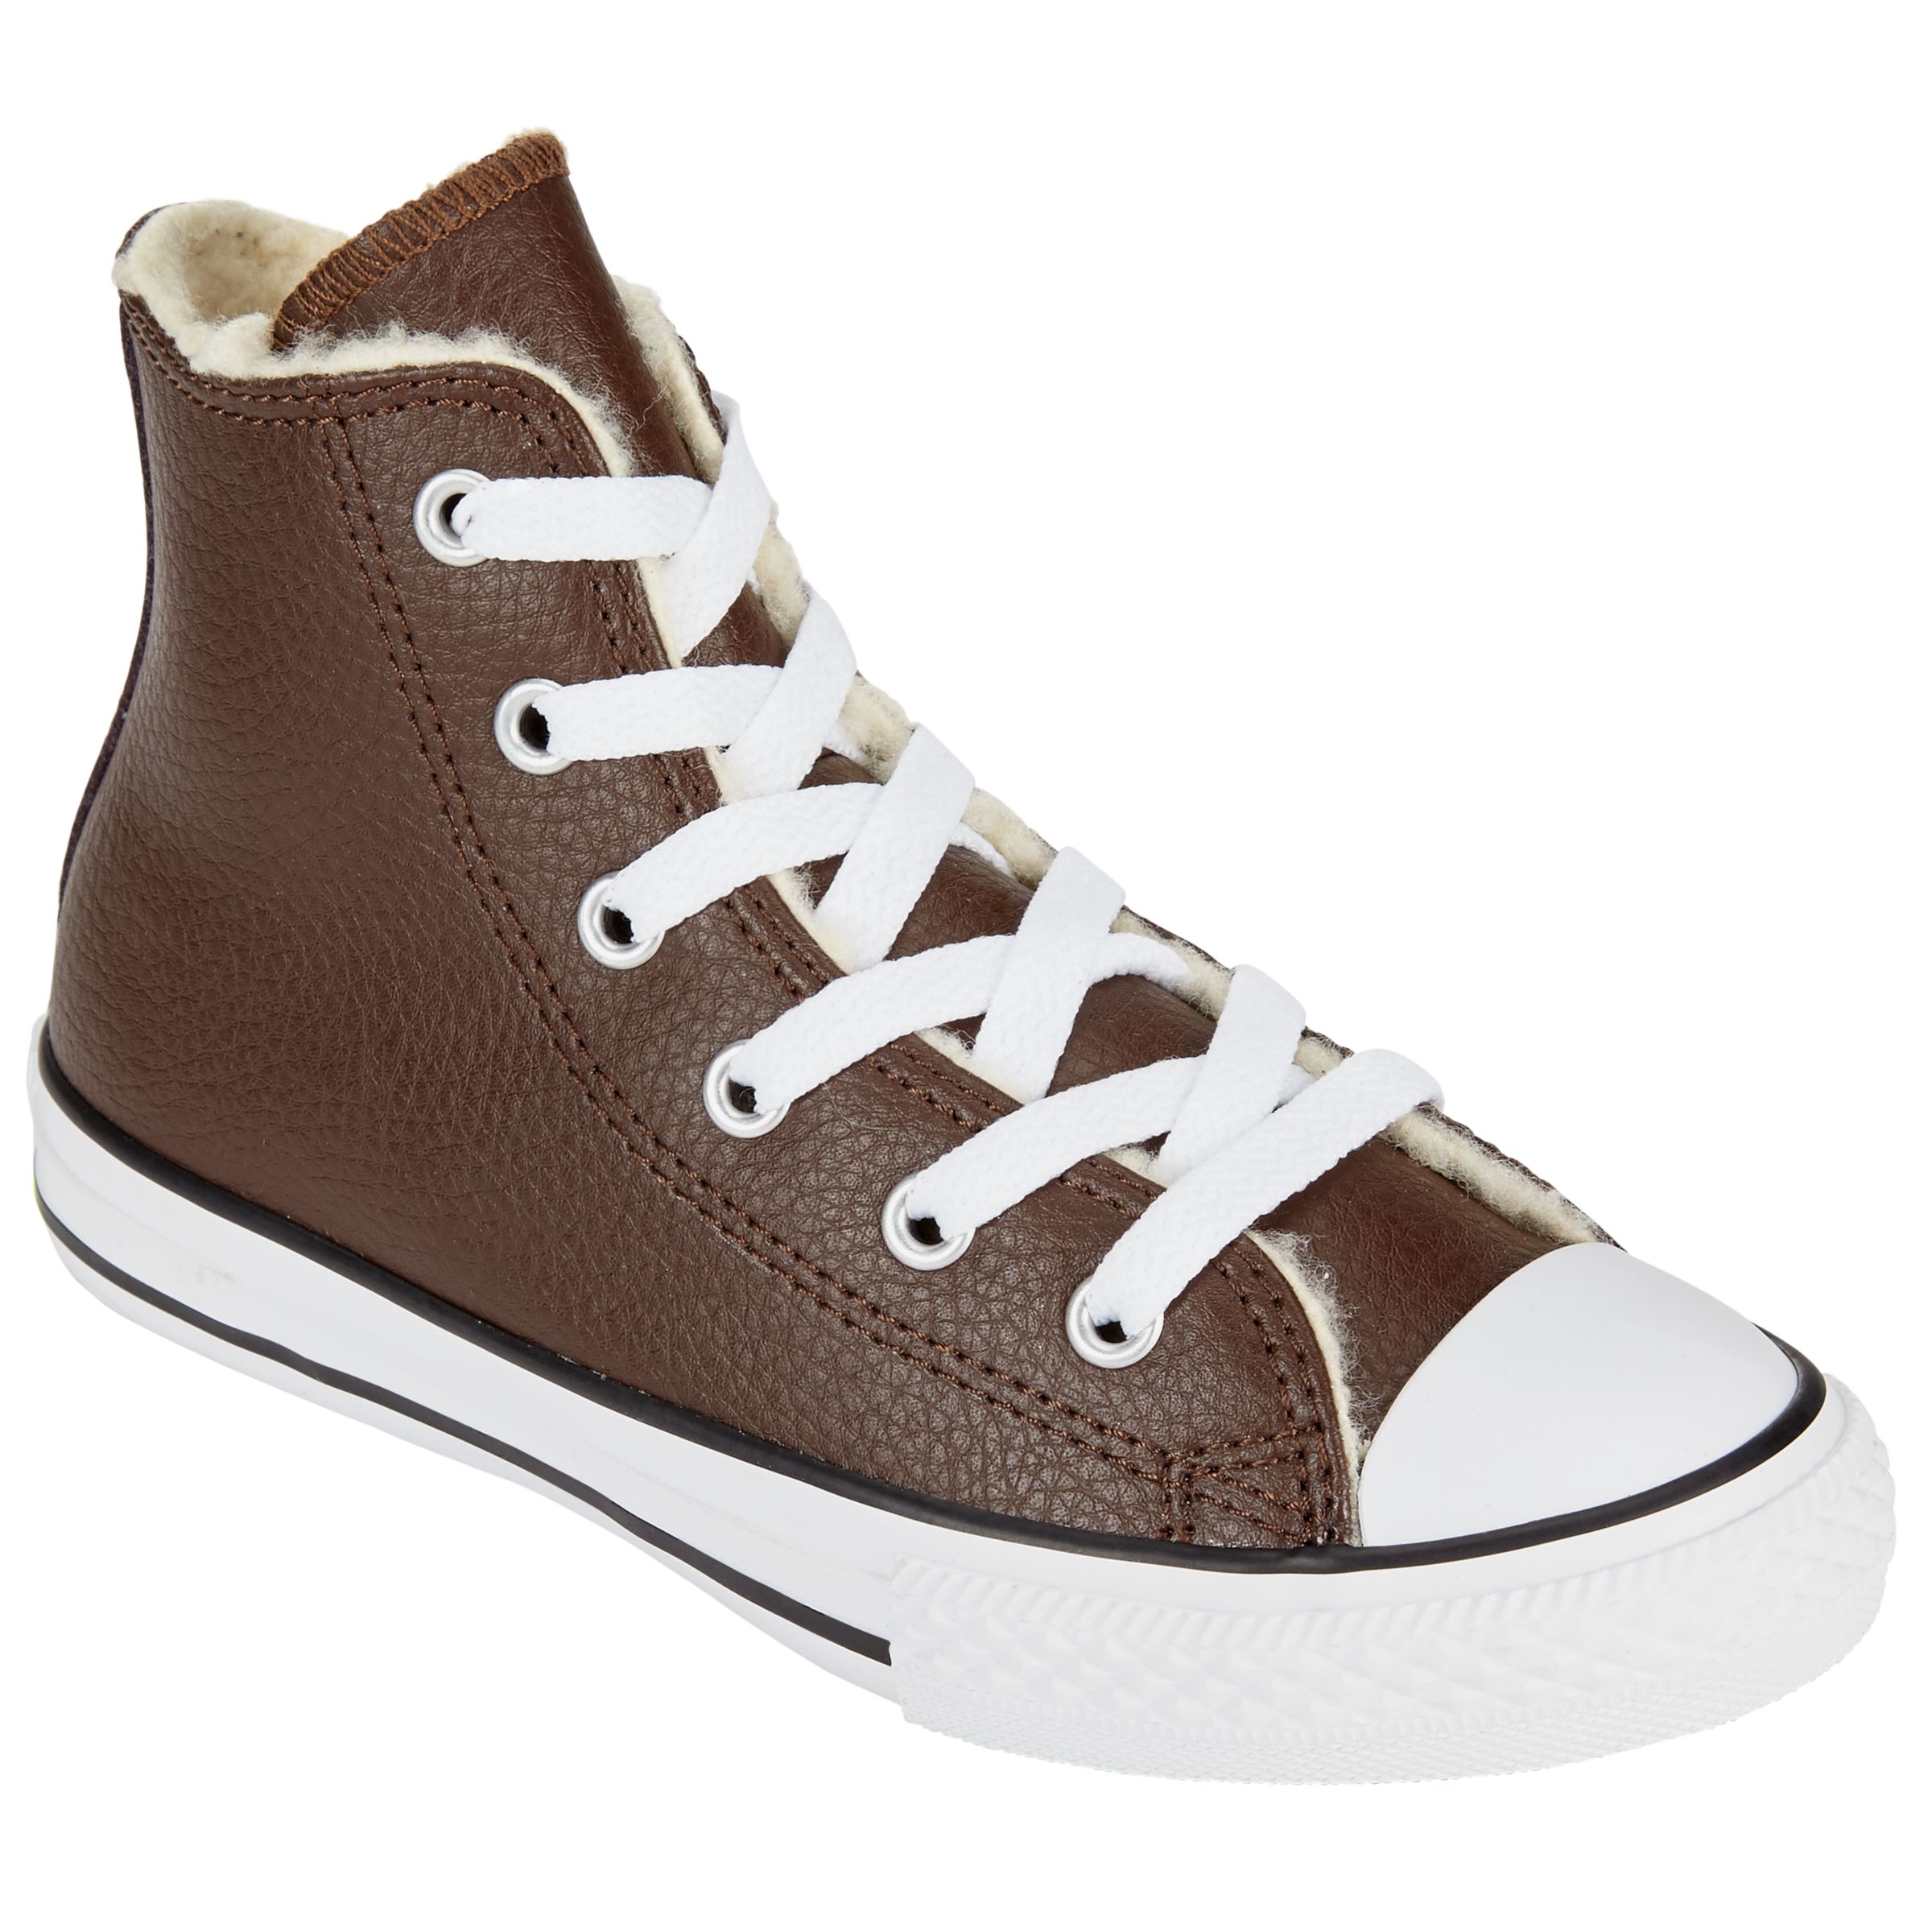 converse all star leather fur